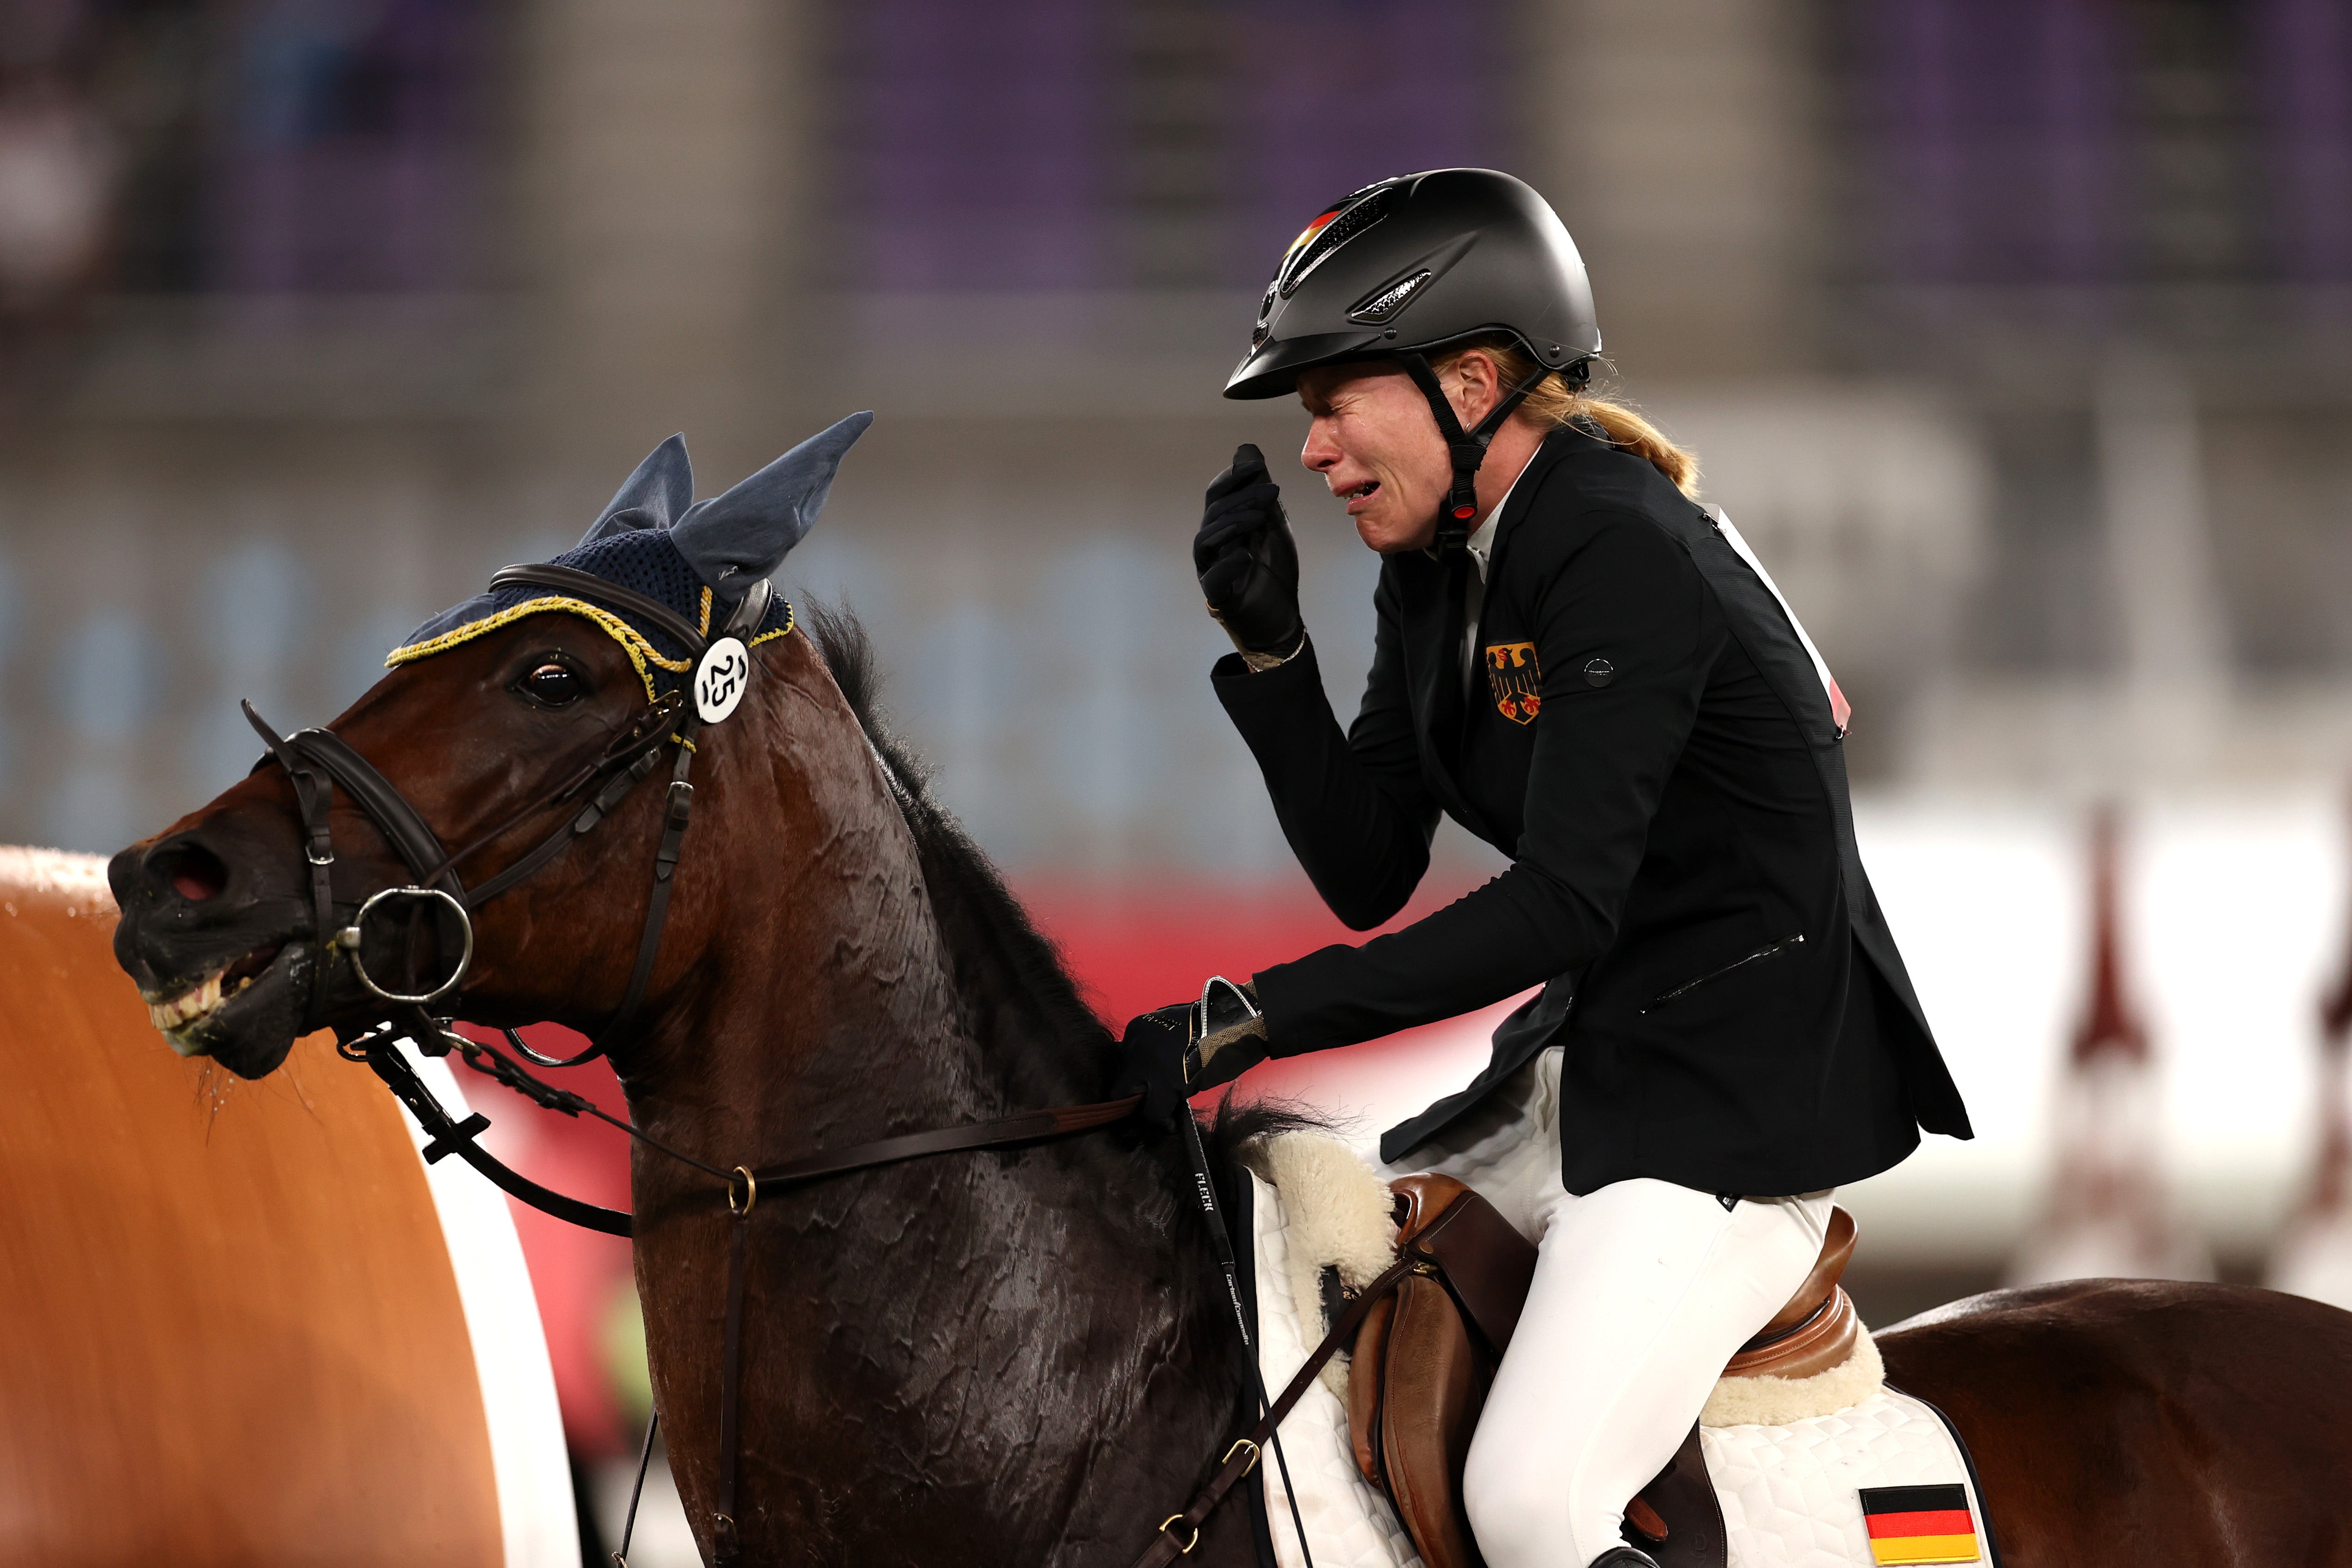 Annika Schleu of Germany cries after failing to guide her horse in the show jumping at the Tokyo Olympics